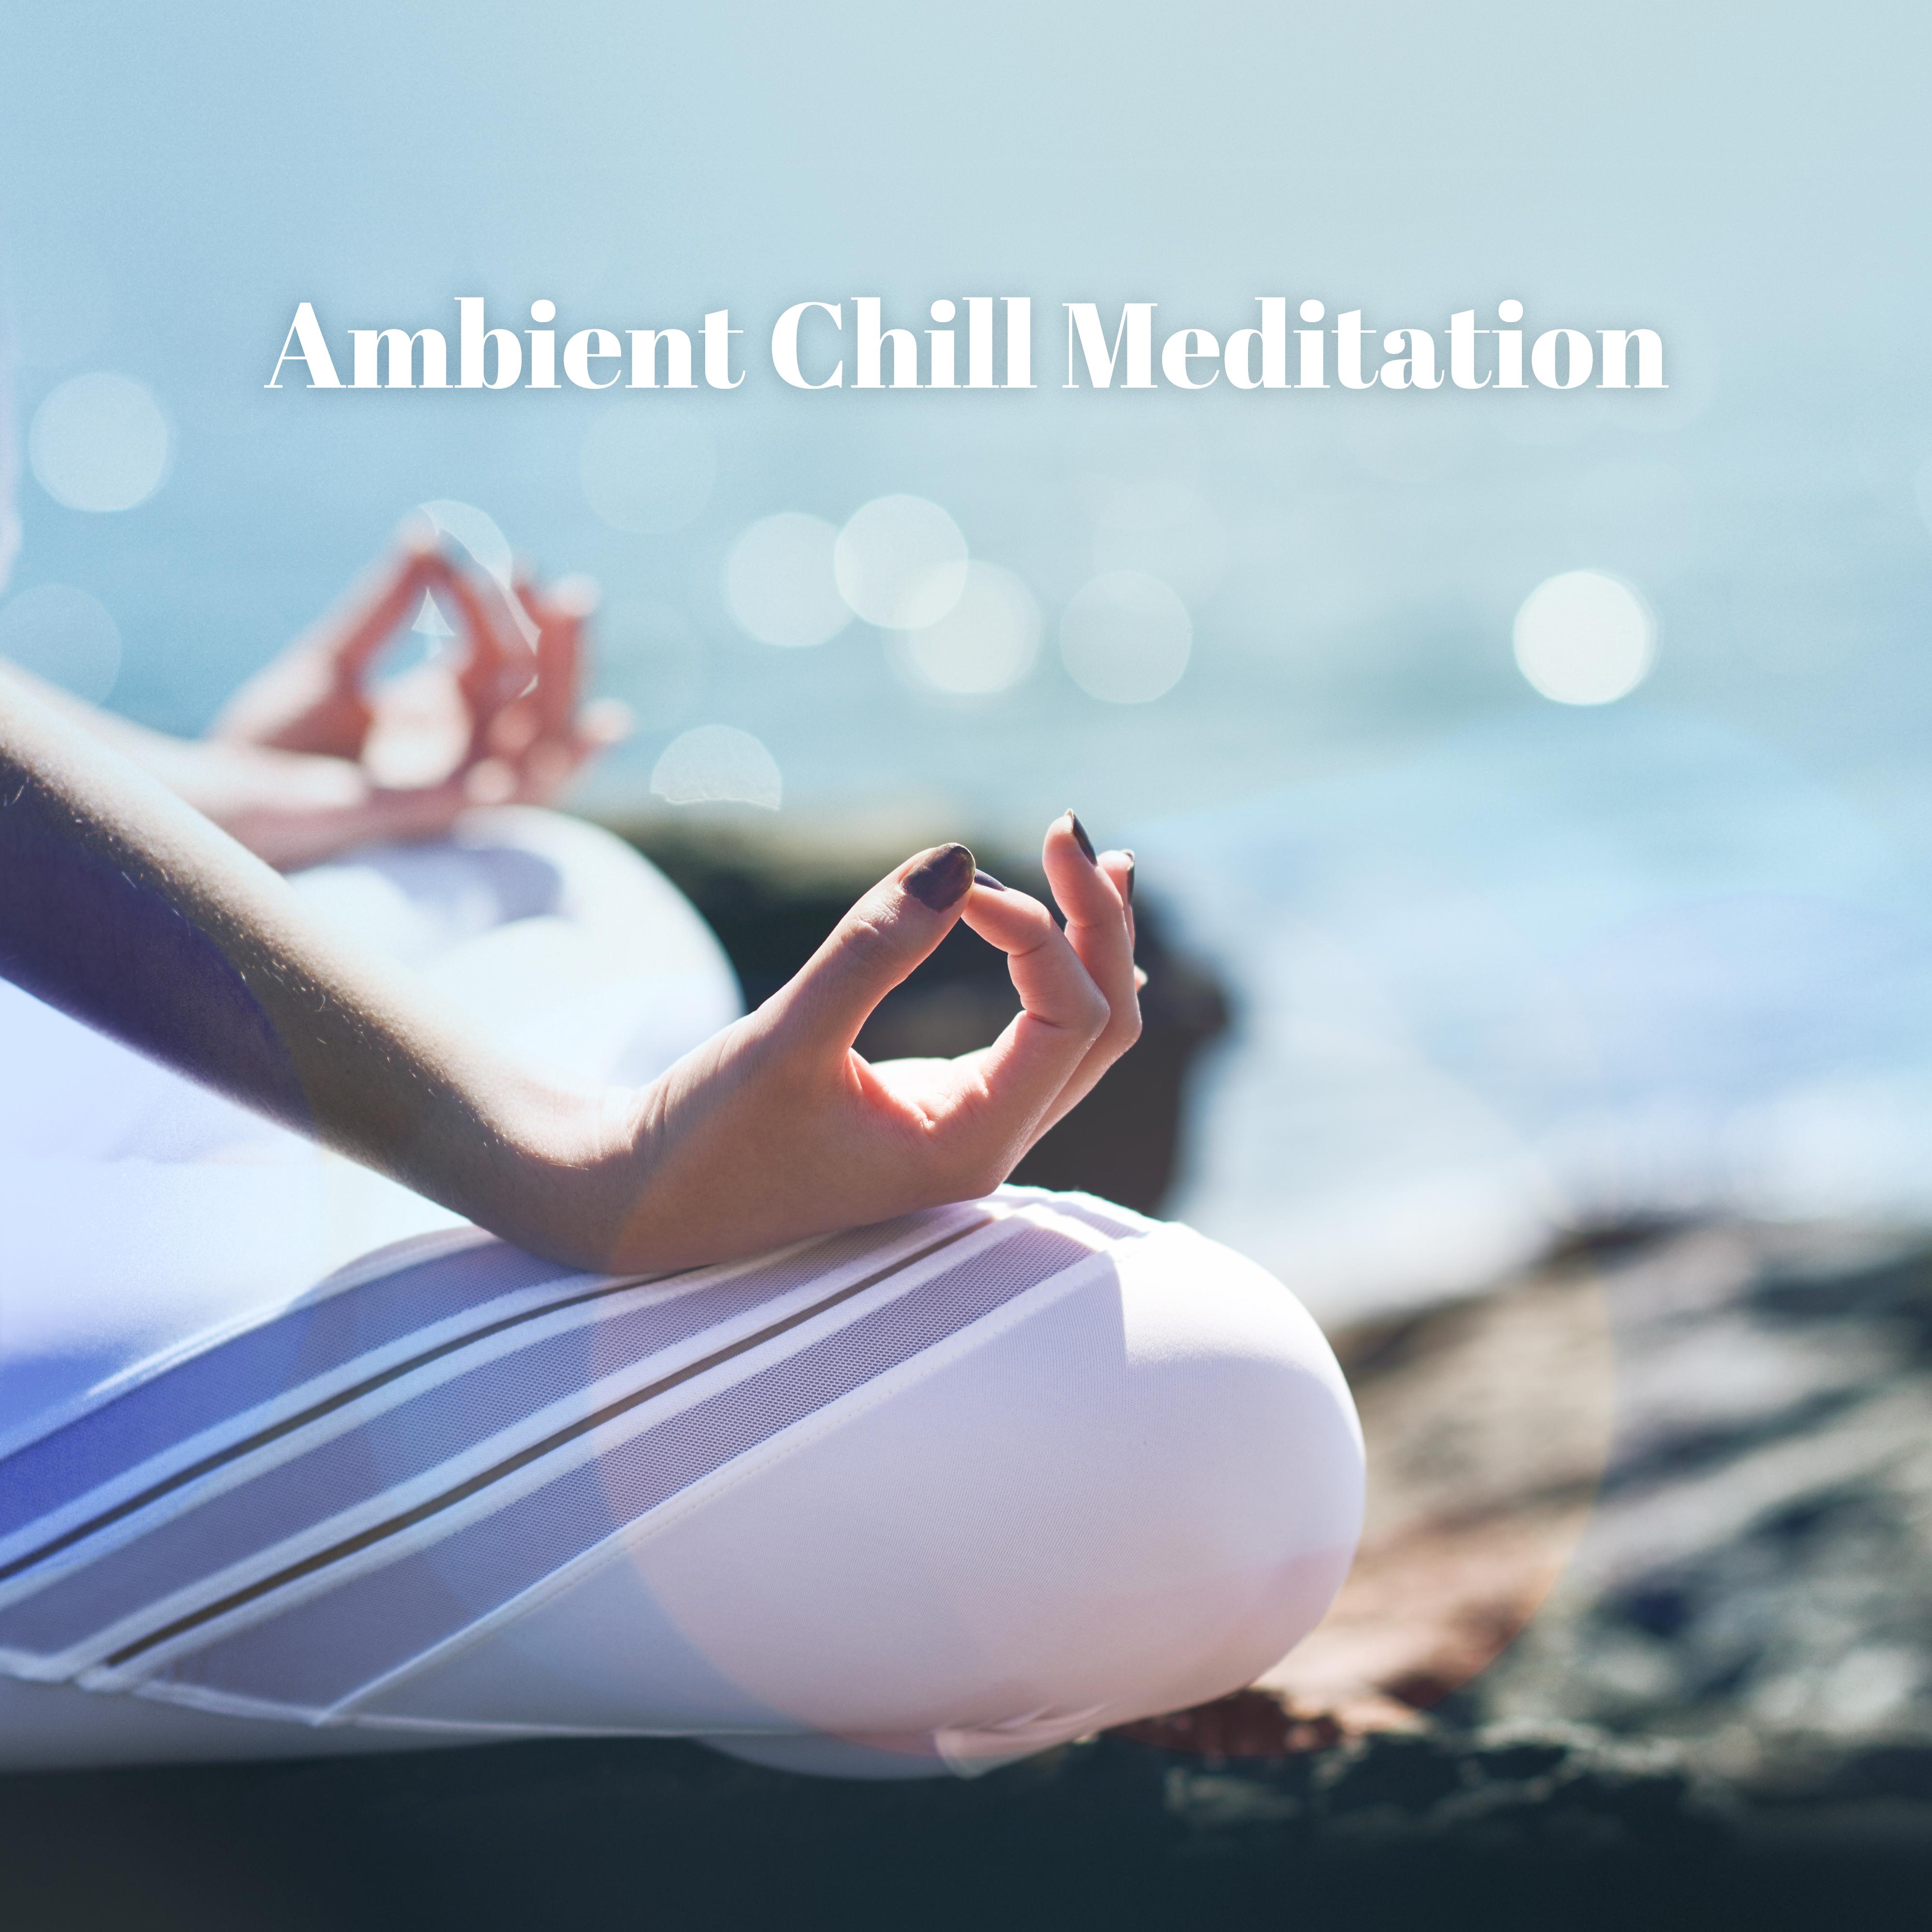 Ambient Chill Meditation  Yoga Zone, Relaxing Music Therapy, Mindful Music, Inner Harmony, Sounds of Nature to Rest, Sleep, New Age Music